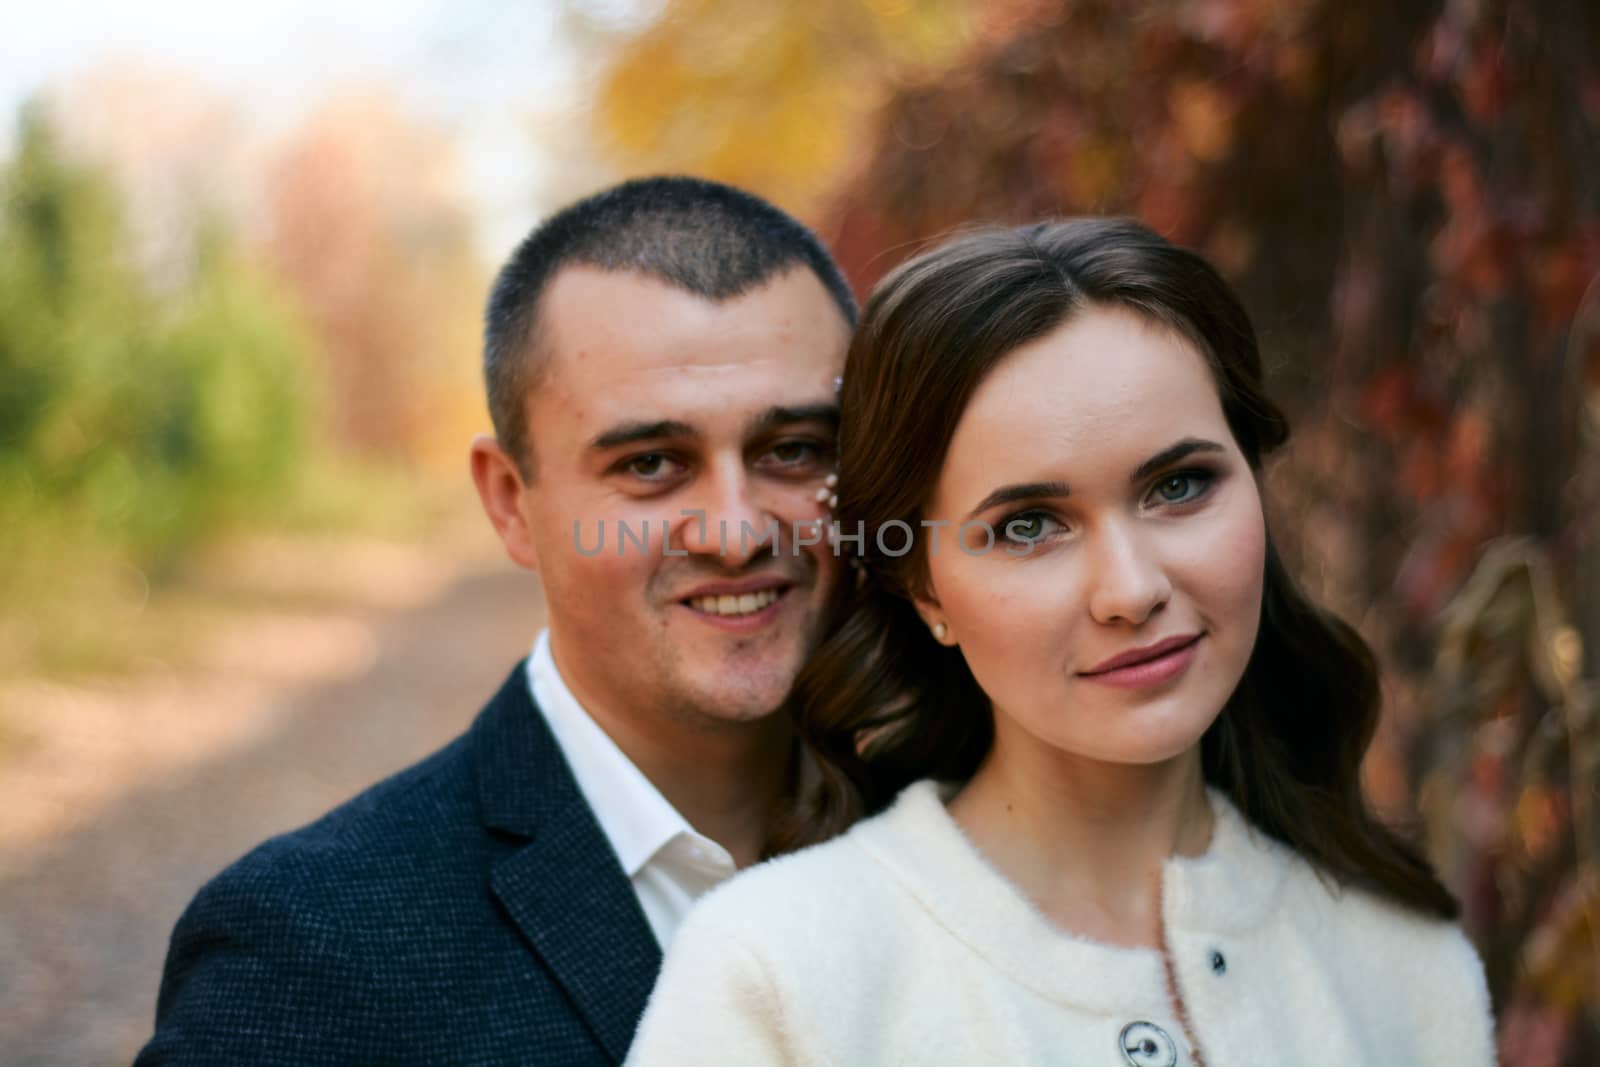 Couple in love close-up portrait. Young male and woman just married. Concept of happy family. Modern family outdoor.